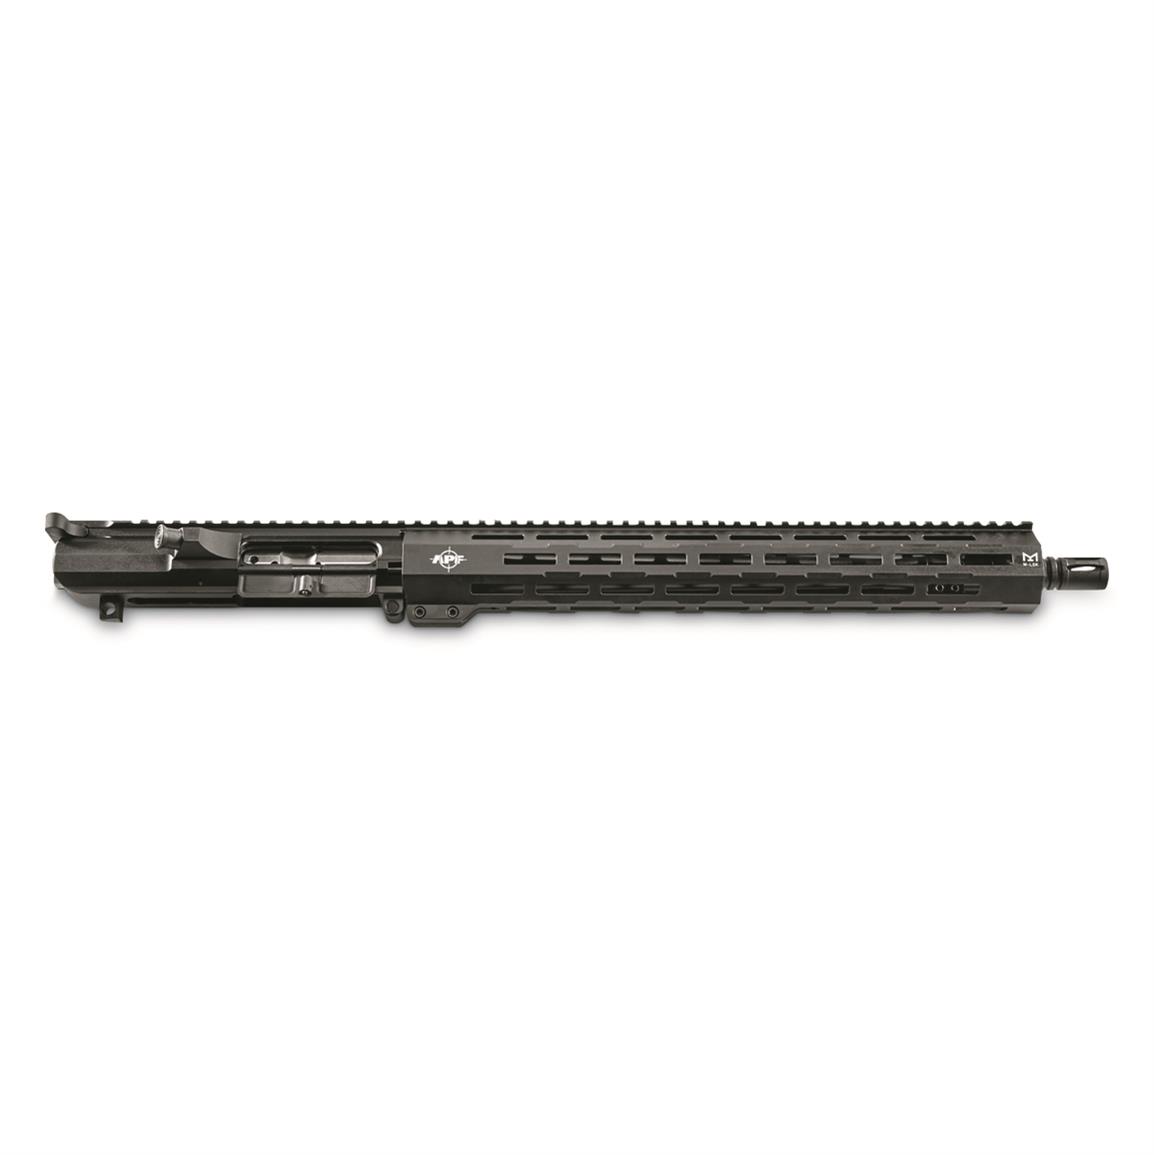 APF 308 Carbine .308 Winchester/7.62 NATO Complete Upper Receiver, 16" Stainless Barrel